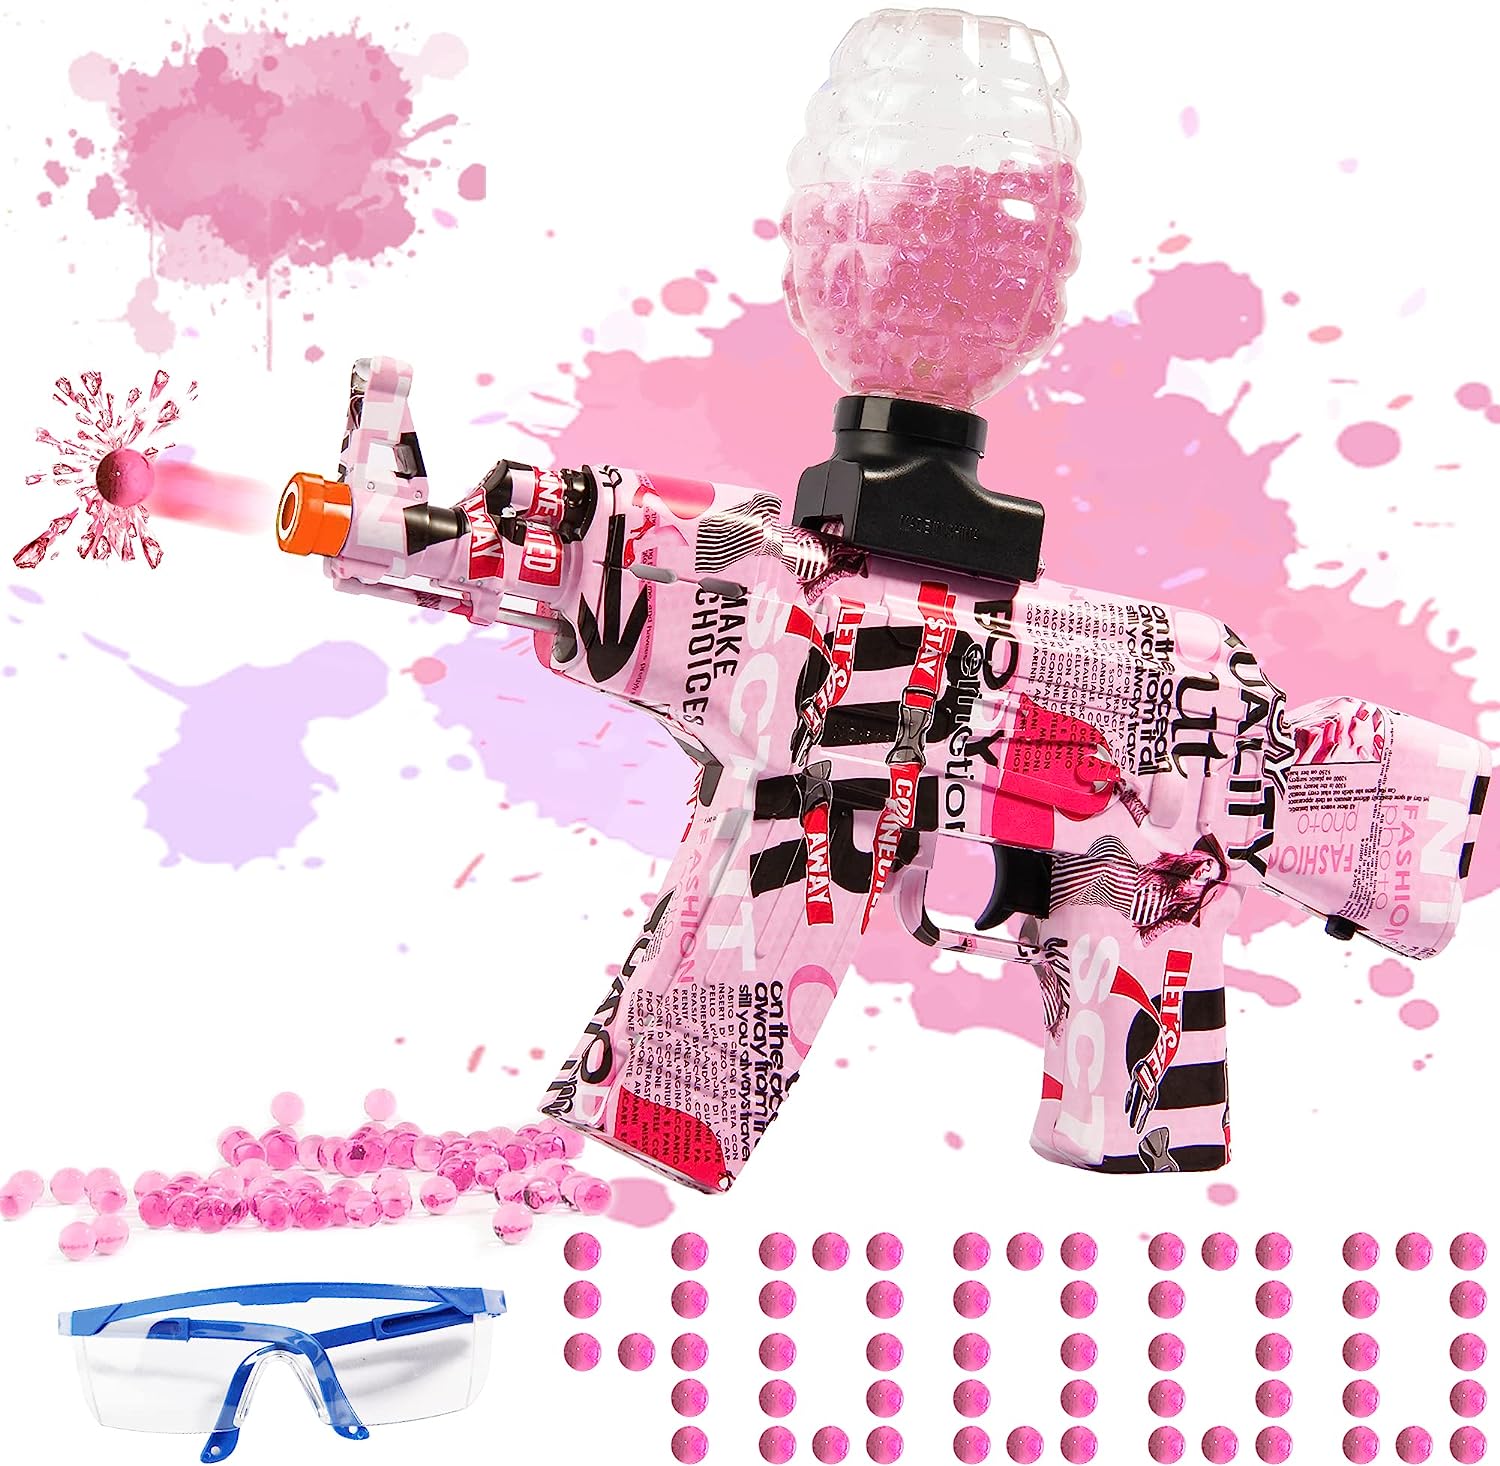 A pink paintball gun with pink paint splatters and goggles. Introducing the Pink Splatter Blaster For Orbeez Automatic, now equipped with 40000+ water beads for ultimate